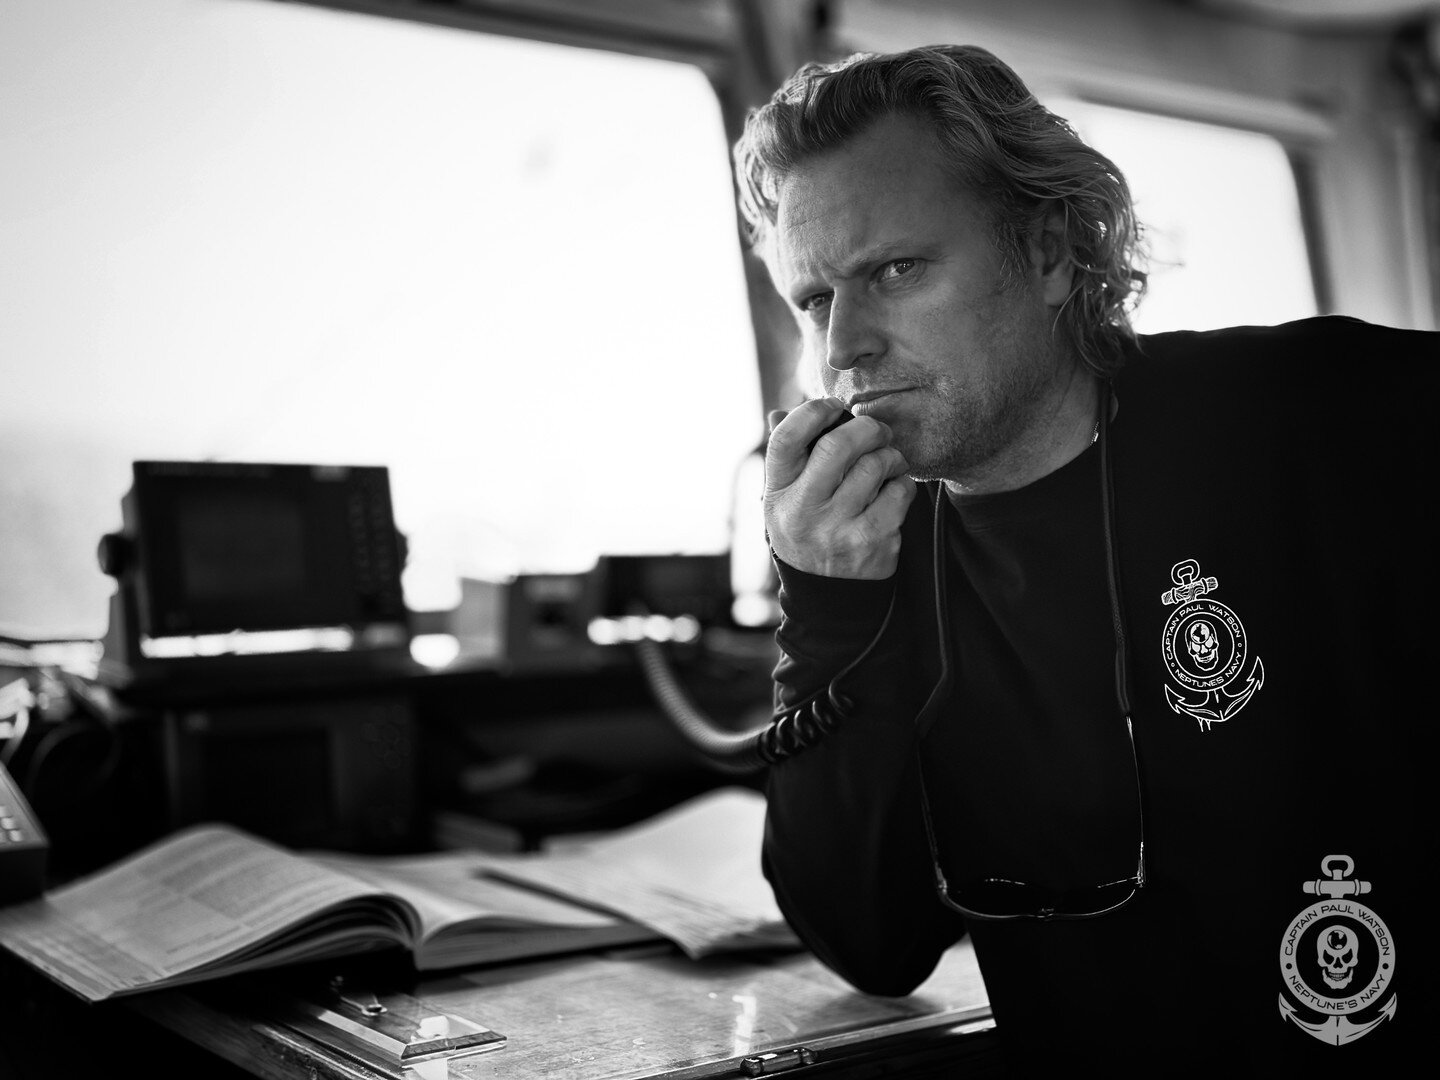 MEET THE CREW!

Dan Binyon, from the South West of England in the UK, is Captain of the M/Y John Paul DeJoria. He initially joined as Chief Mate when the ship was docked in Hull, and throughout Operation Paiakan. 

For Operation Bloody Fjords, Dan wa